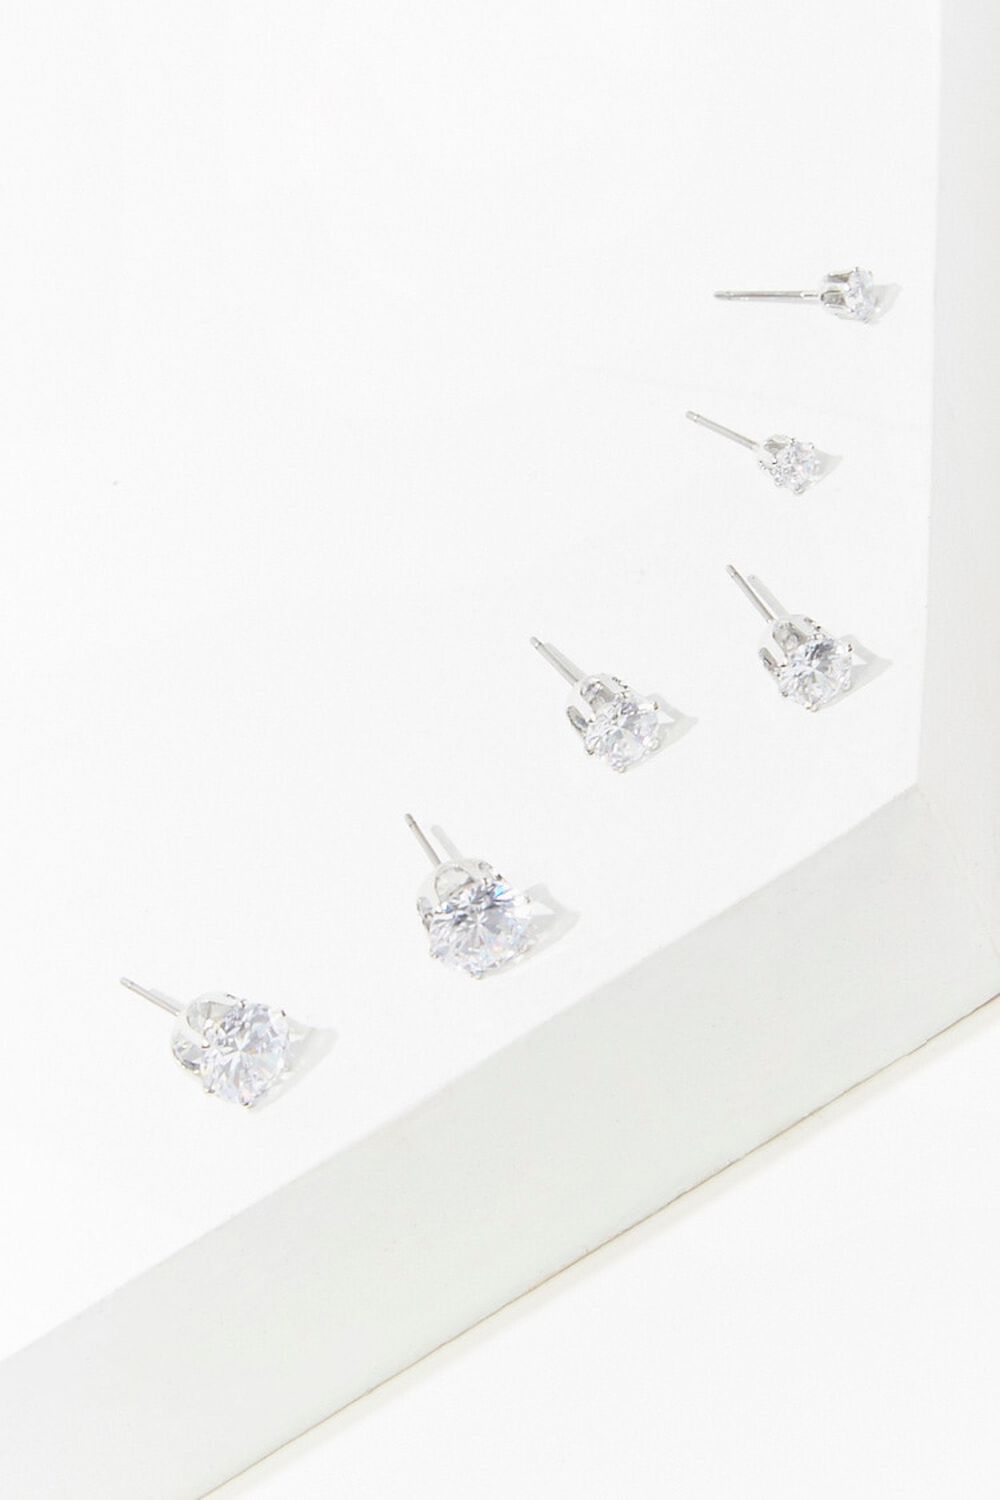 SILVER/CLEAR CZ Stone Stud Earring Set, image 1